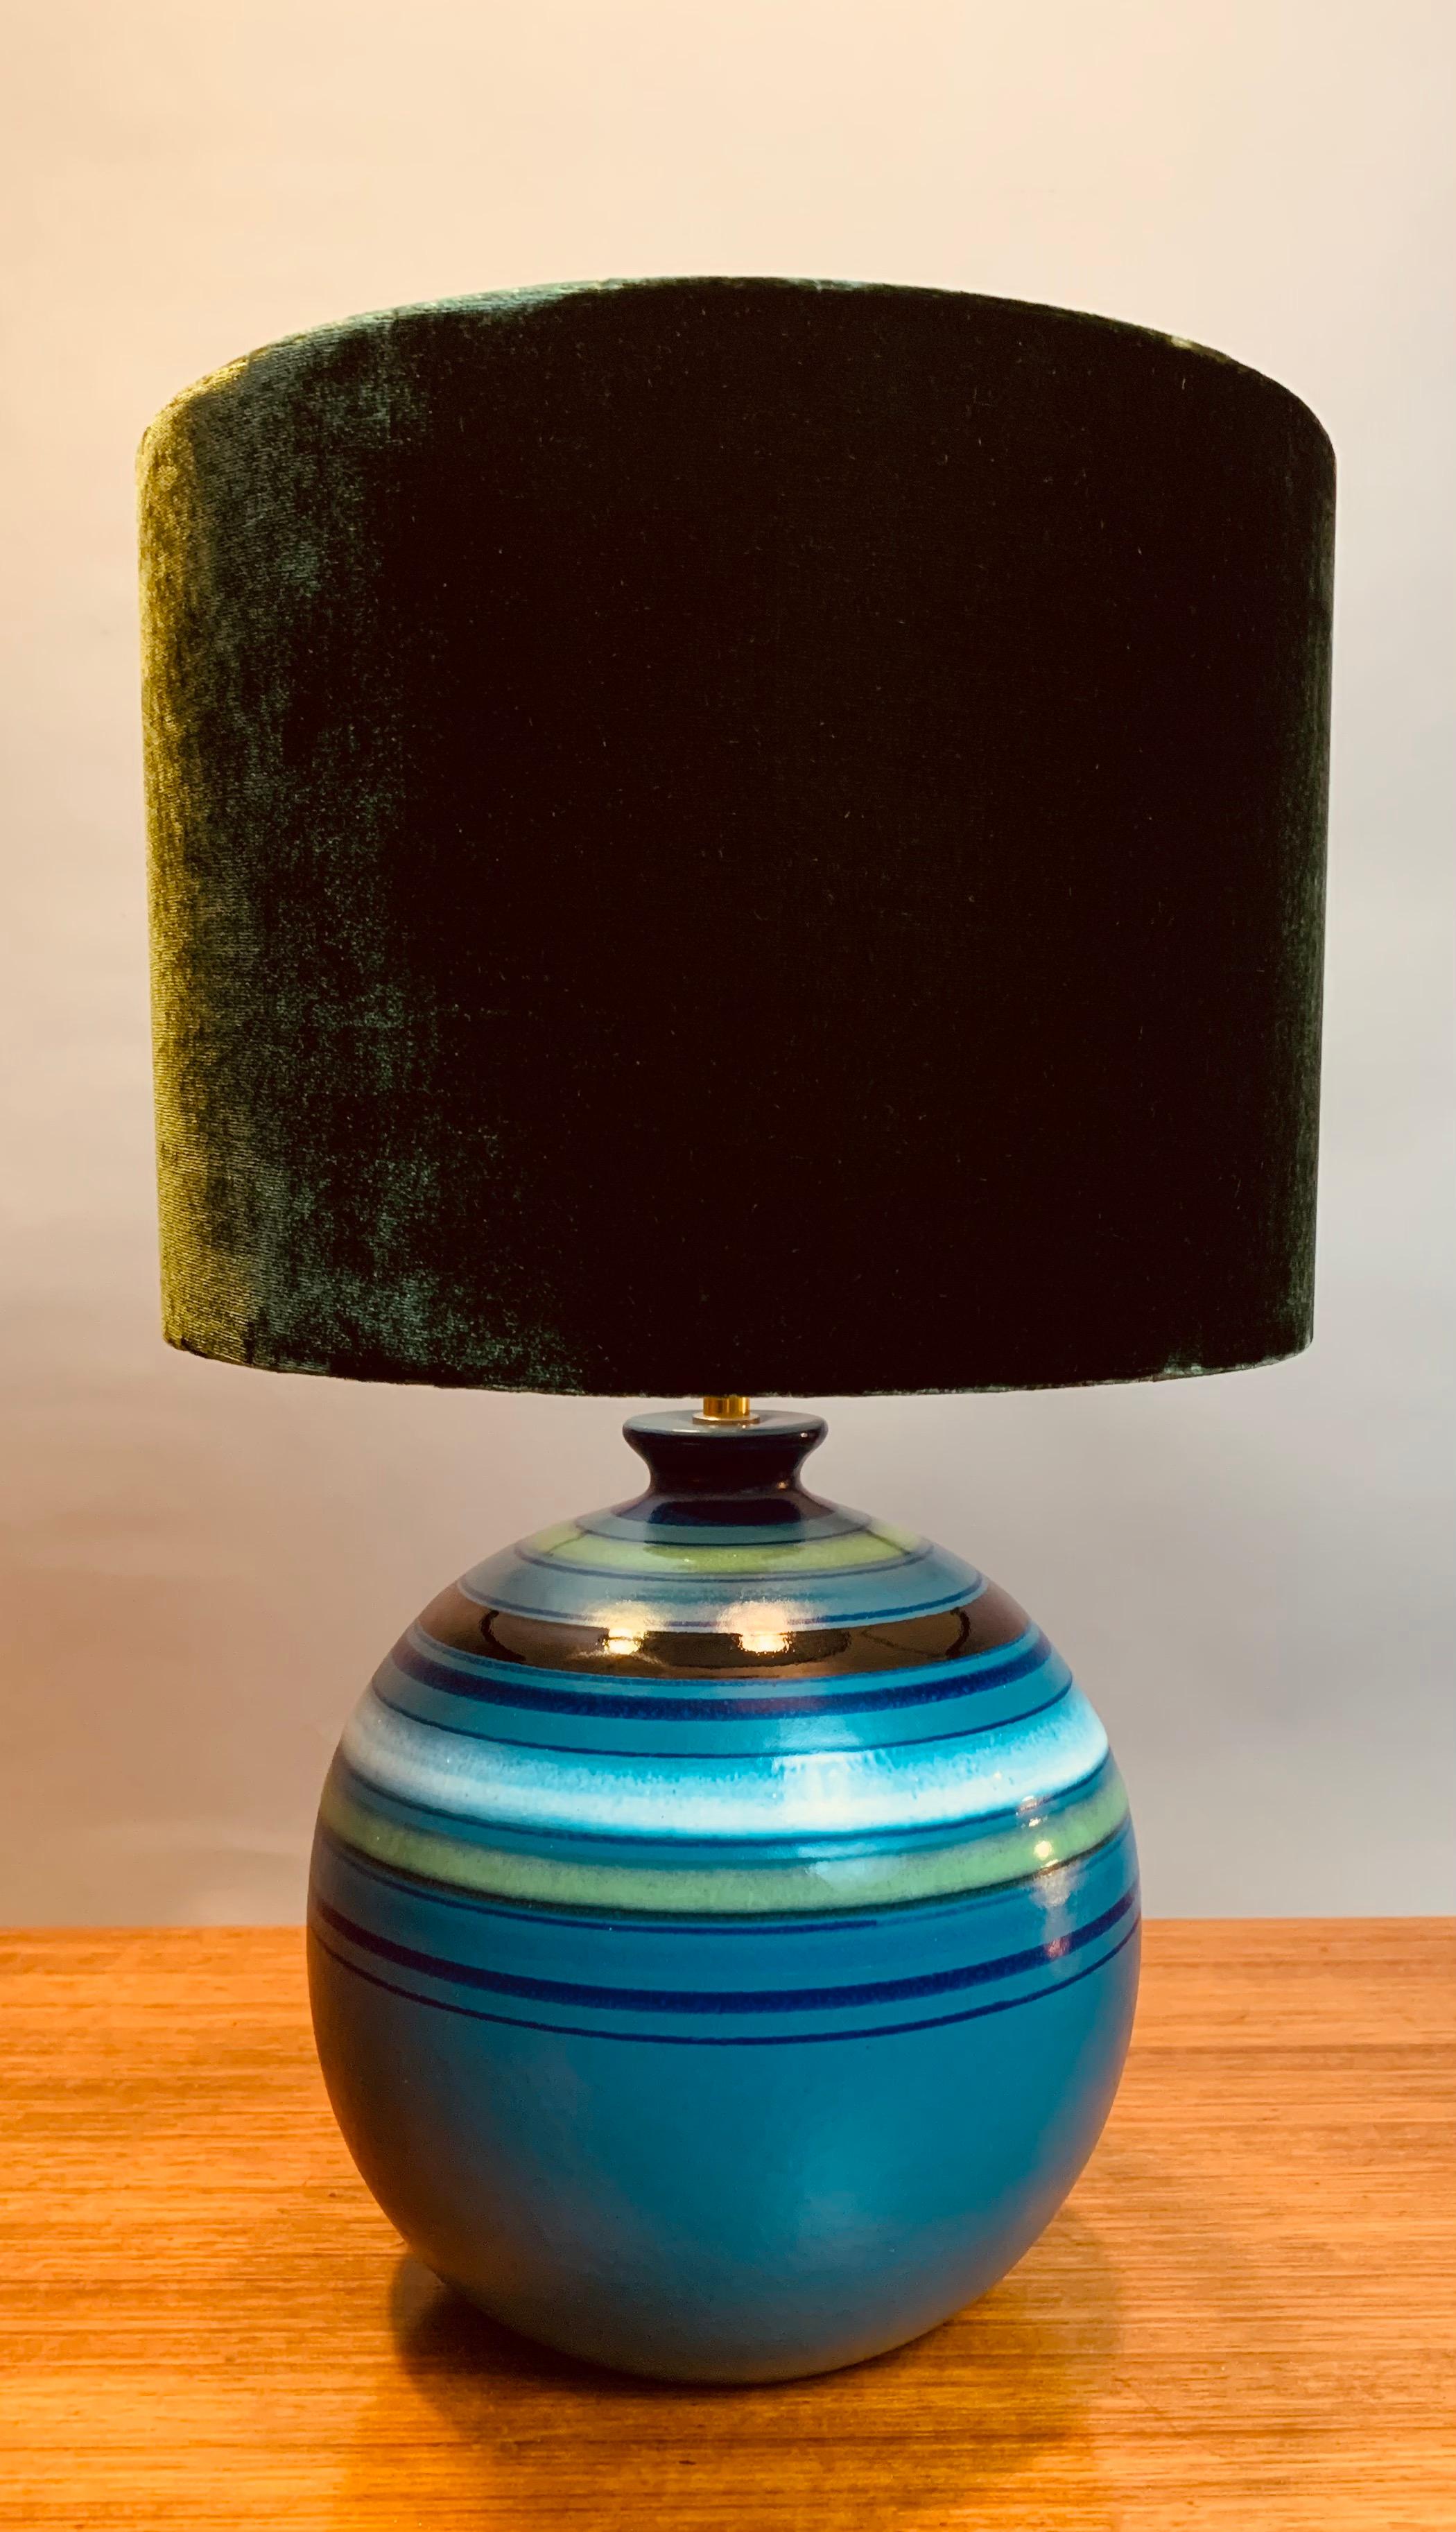 A rare 1969 Italian ceramic pottery table lamp designed by Aldo Londi for Bitossi for Rosenthal. In excellent original condition. A wonderful glazed and unglazed blue striped vase of blues, greens, whites and blacks. Bitossi also made vase versions